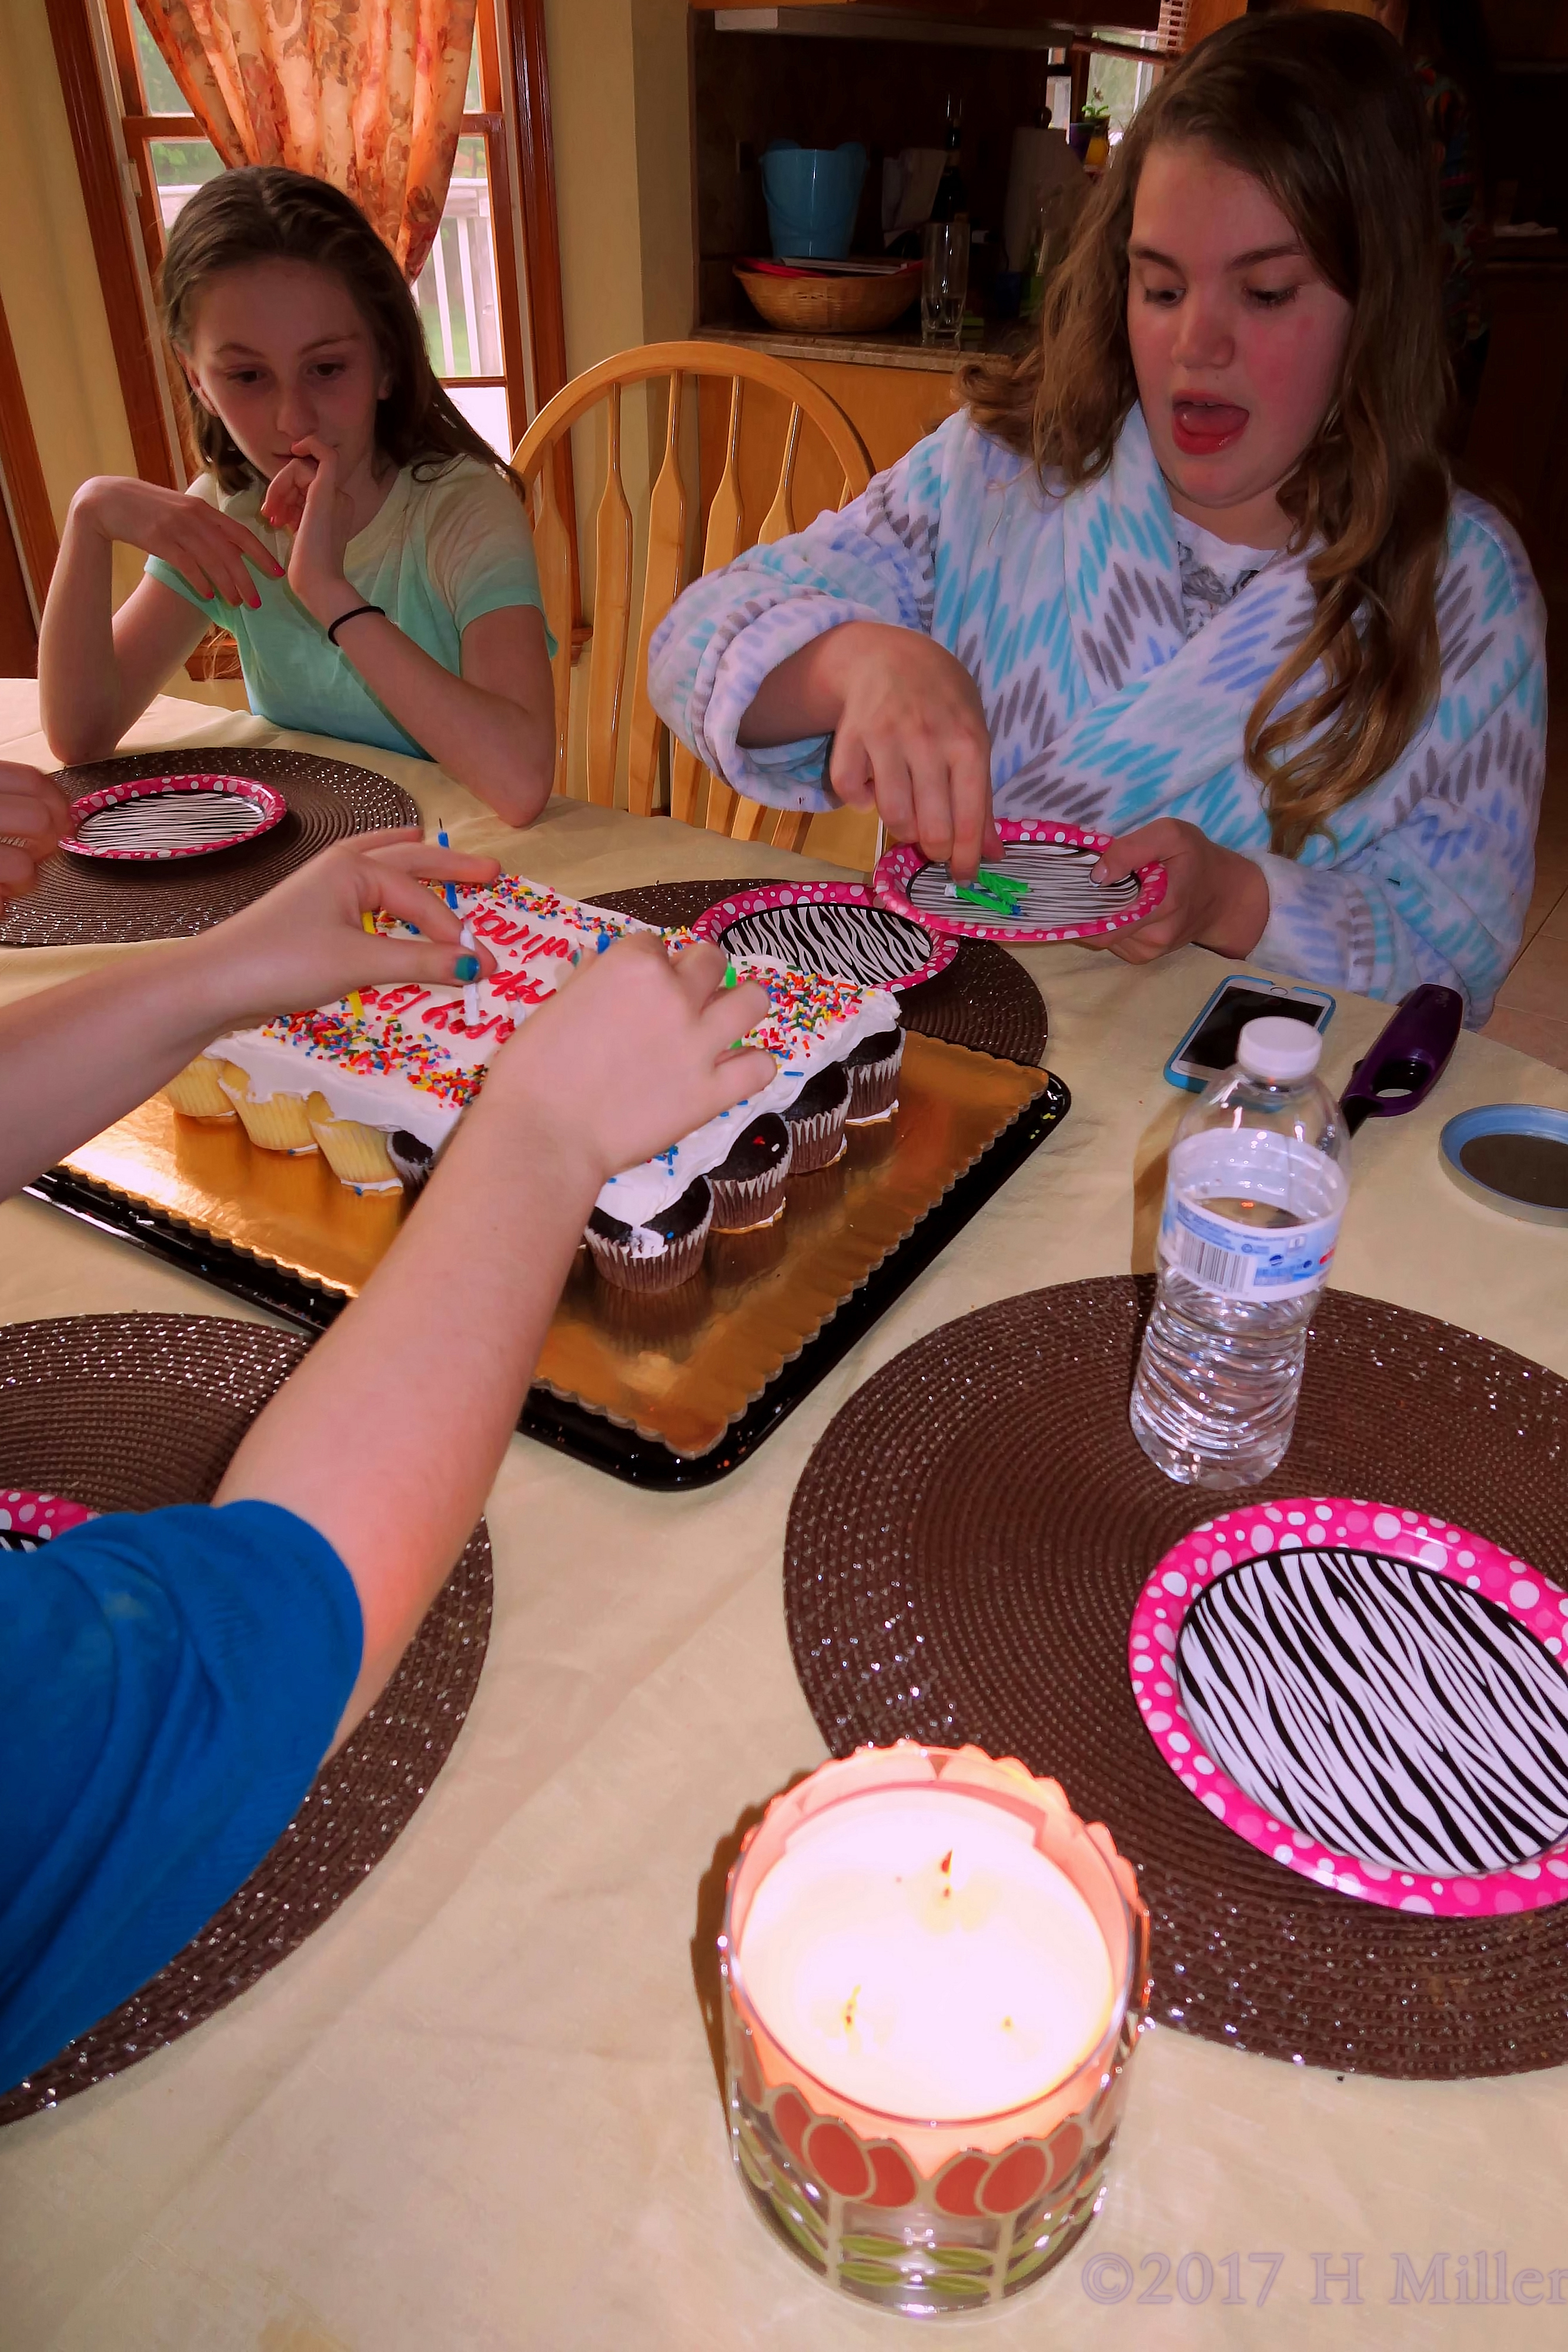 Removing The Candles From Her Birthday Cake! 